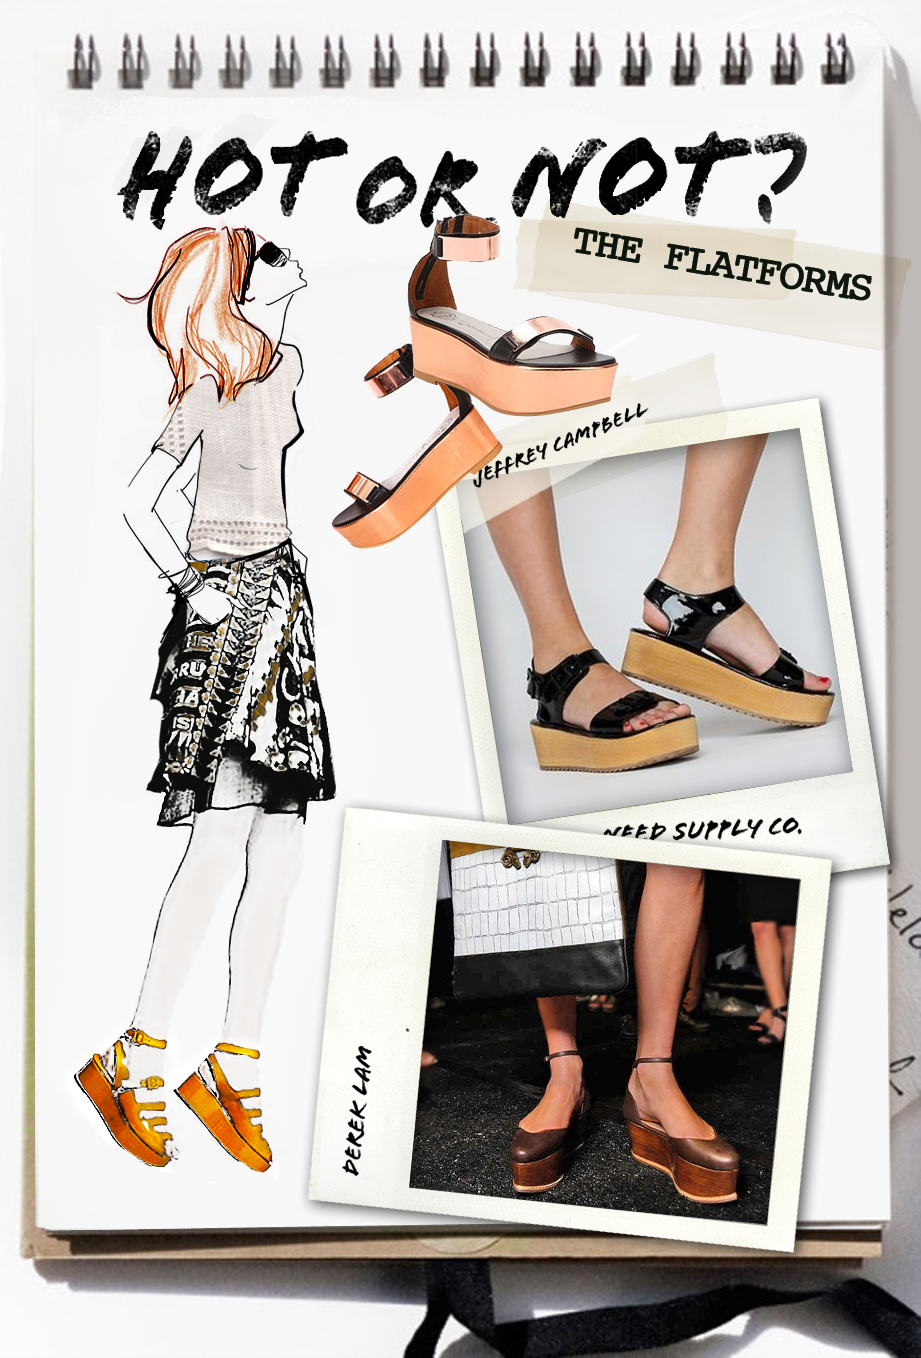 Hot or Not - The Flatforms